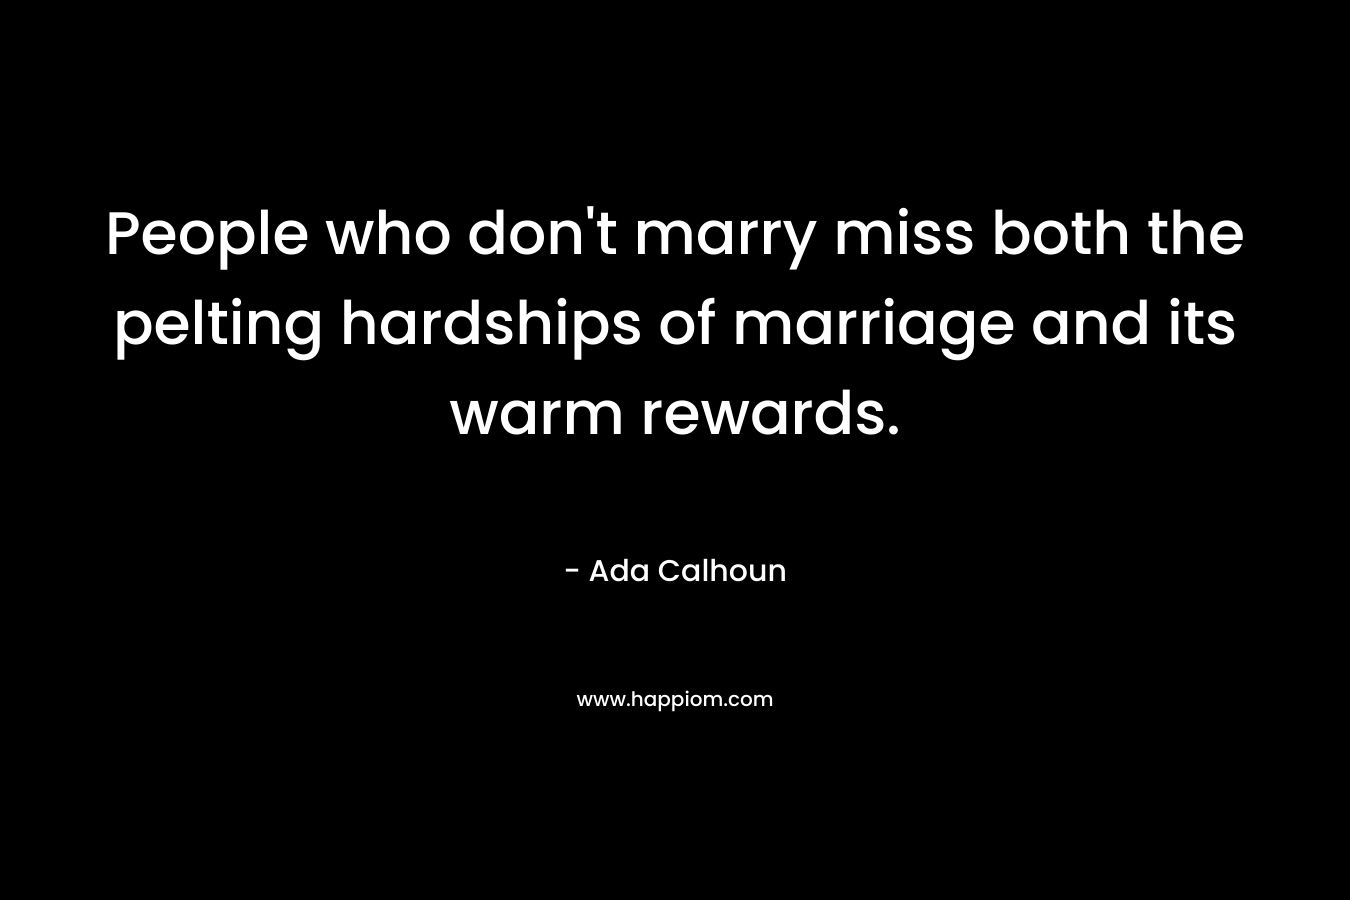 People who don’t marry miss both the pelting hardships of marriage and its warm rewards. – Ada Calhoun